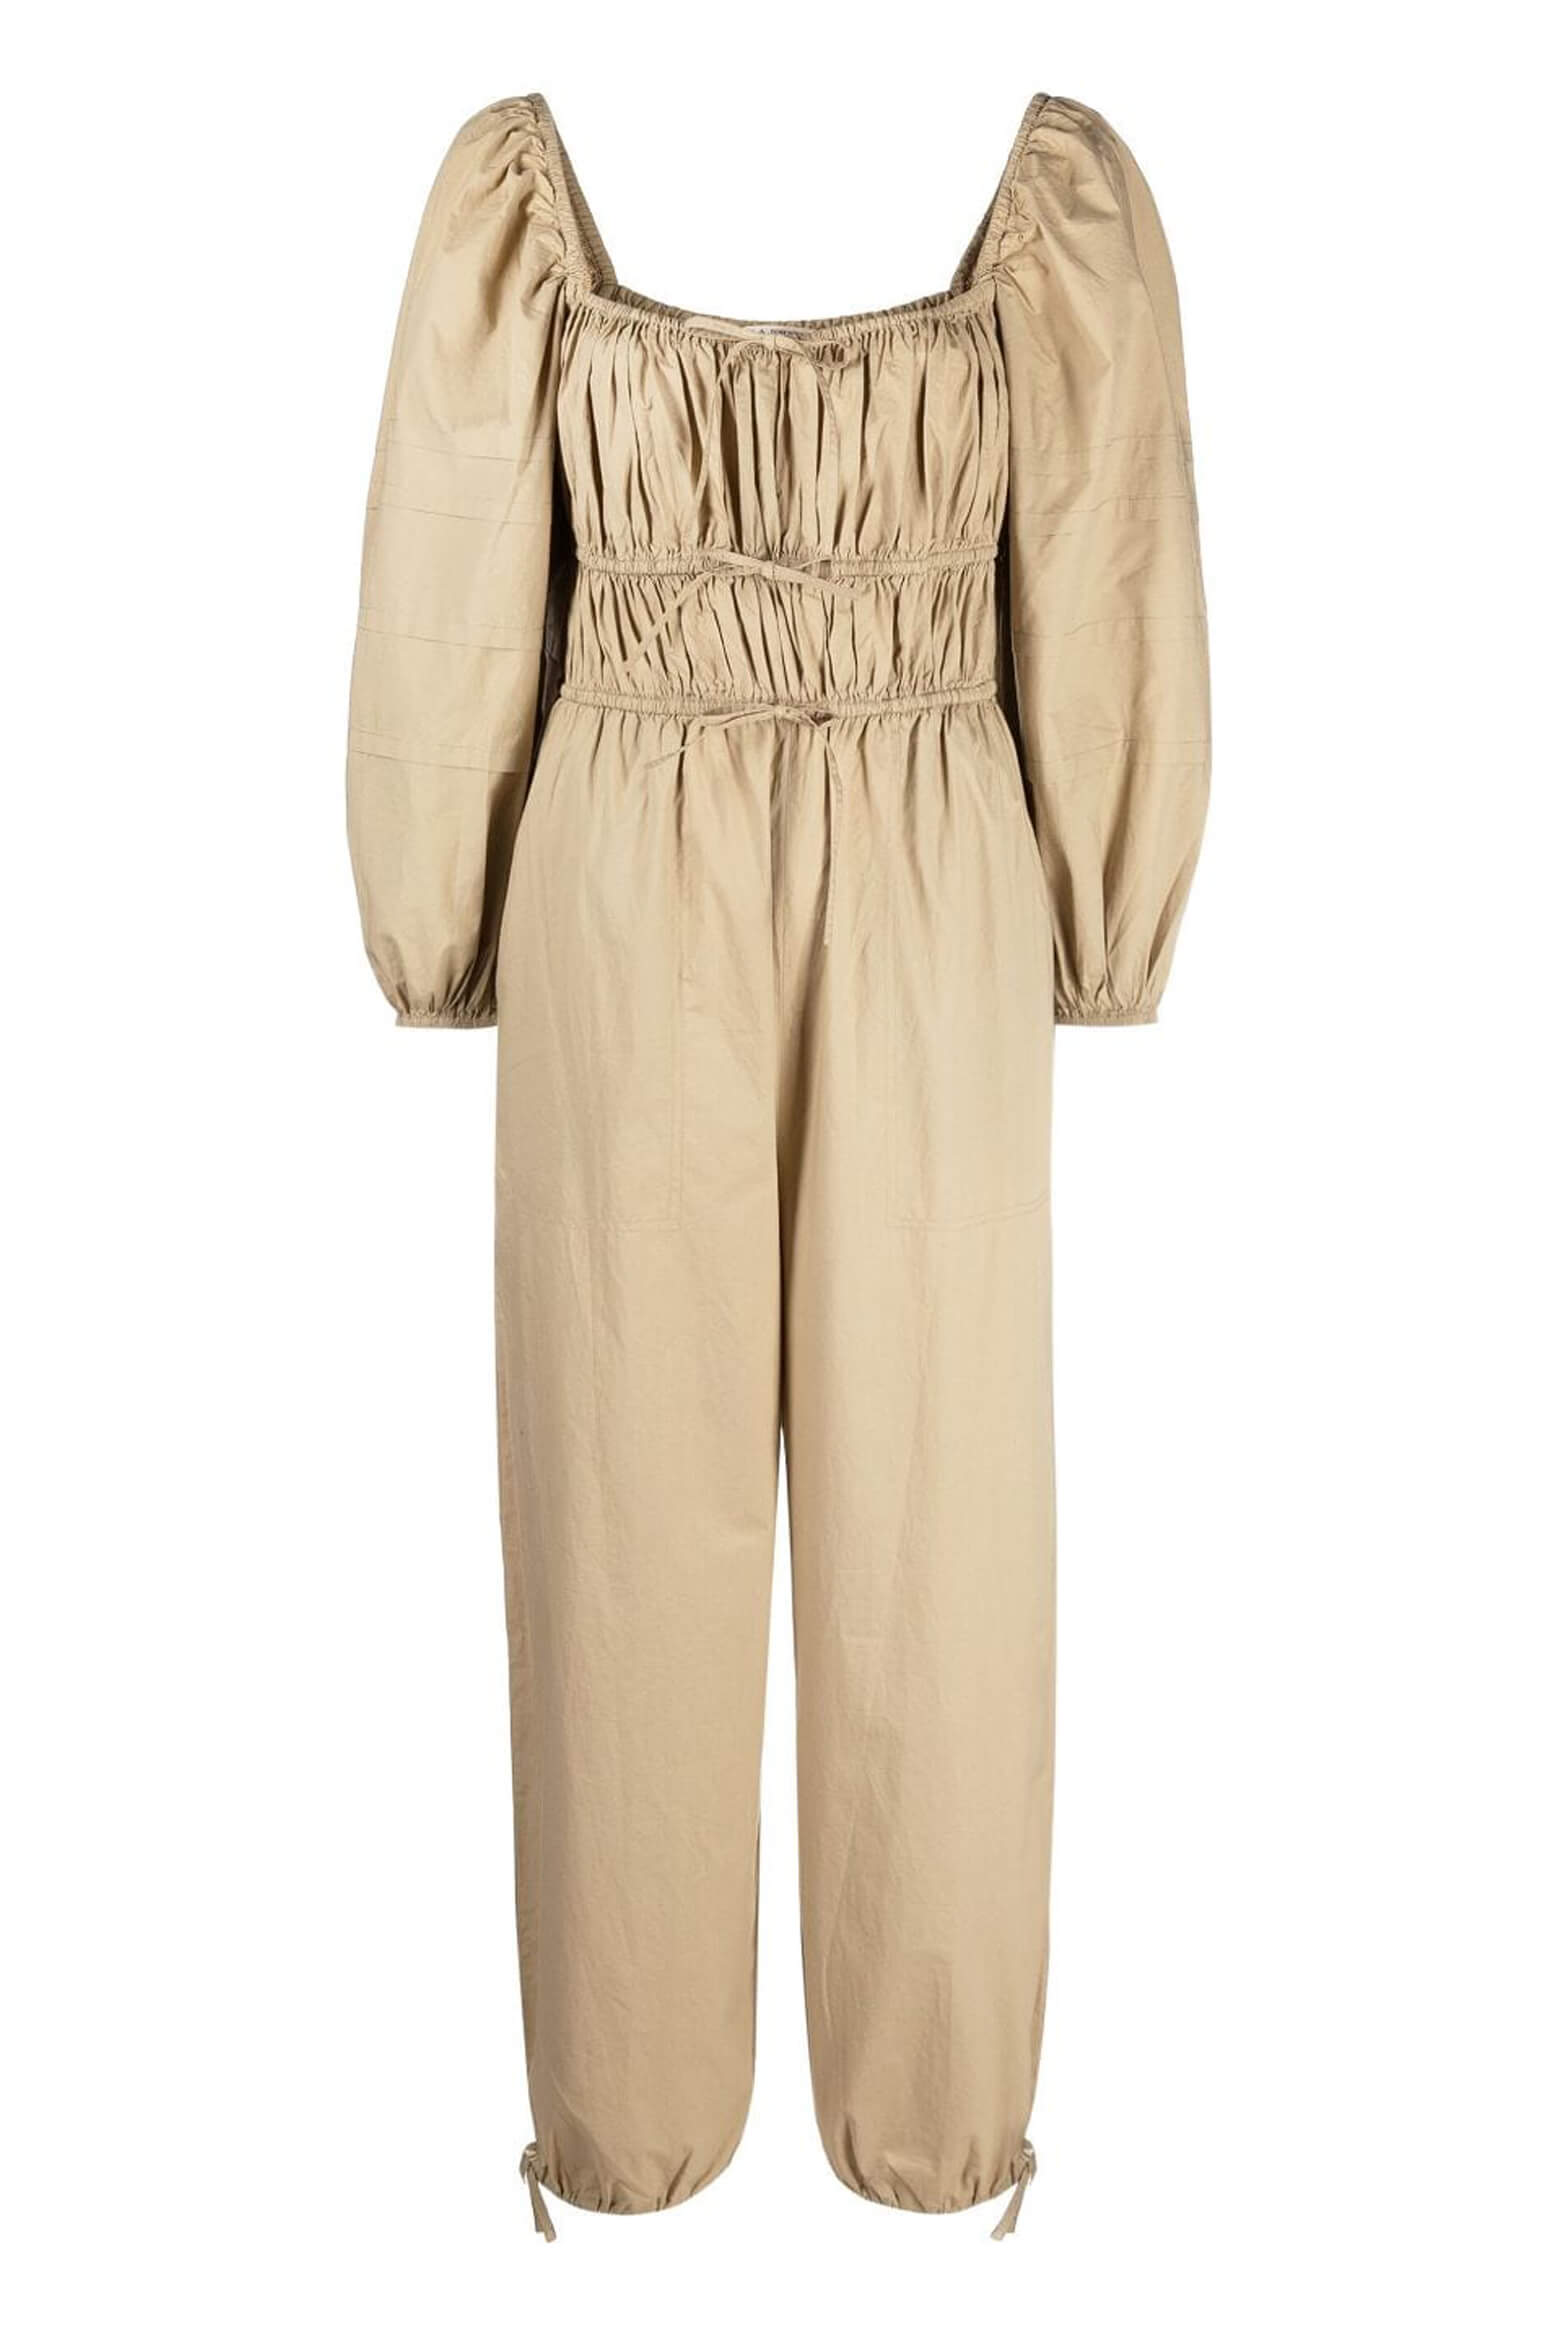 Ulla Johnson Amalie Jumpsuit in Dune from The New Trend